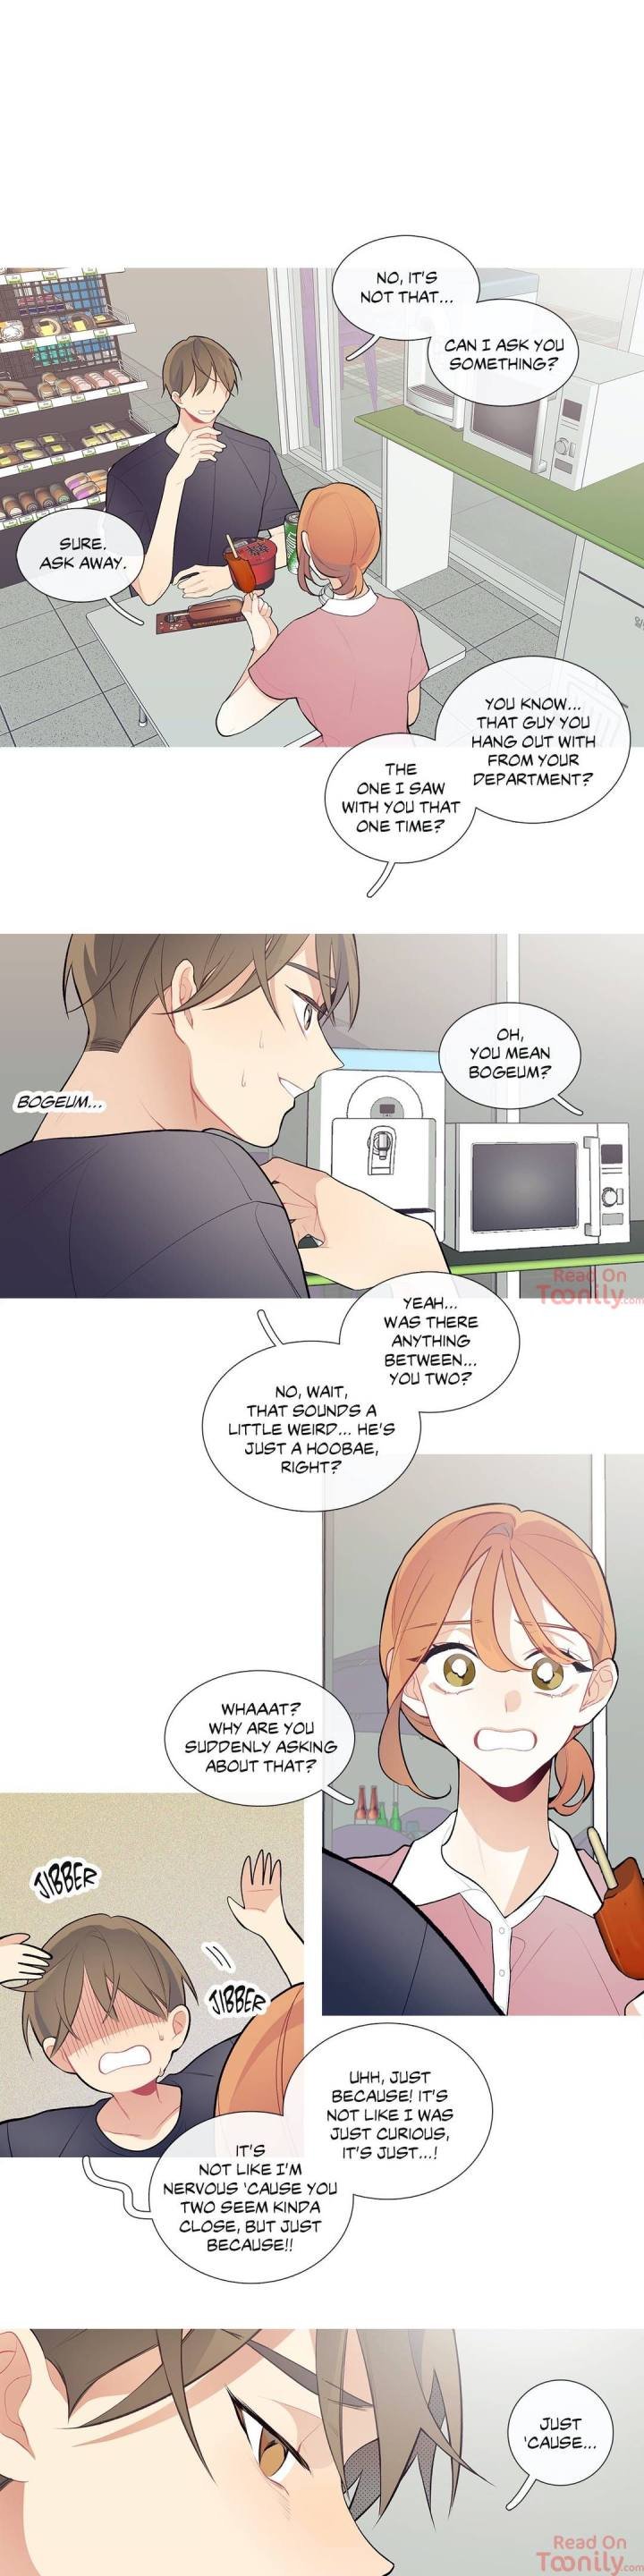 whats-going-on-chap-23-5